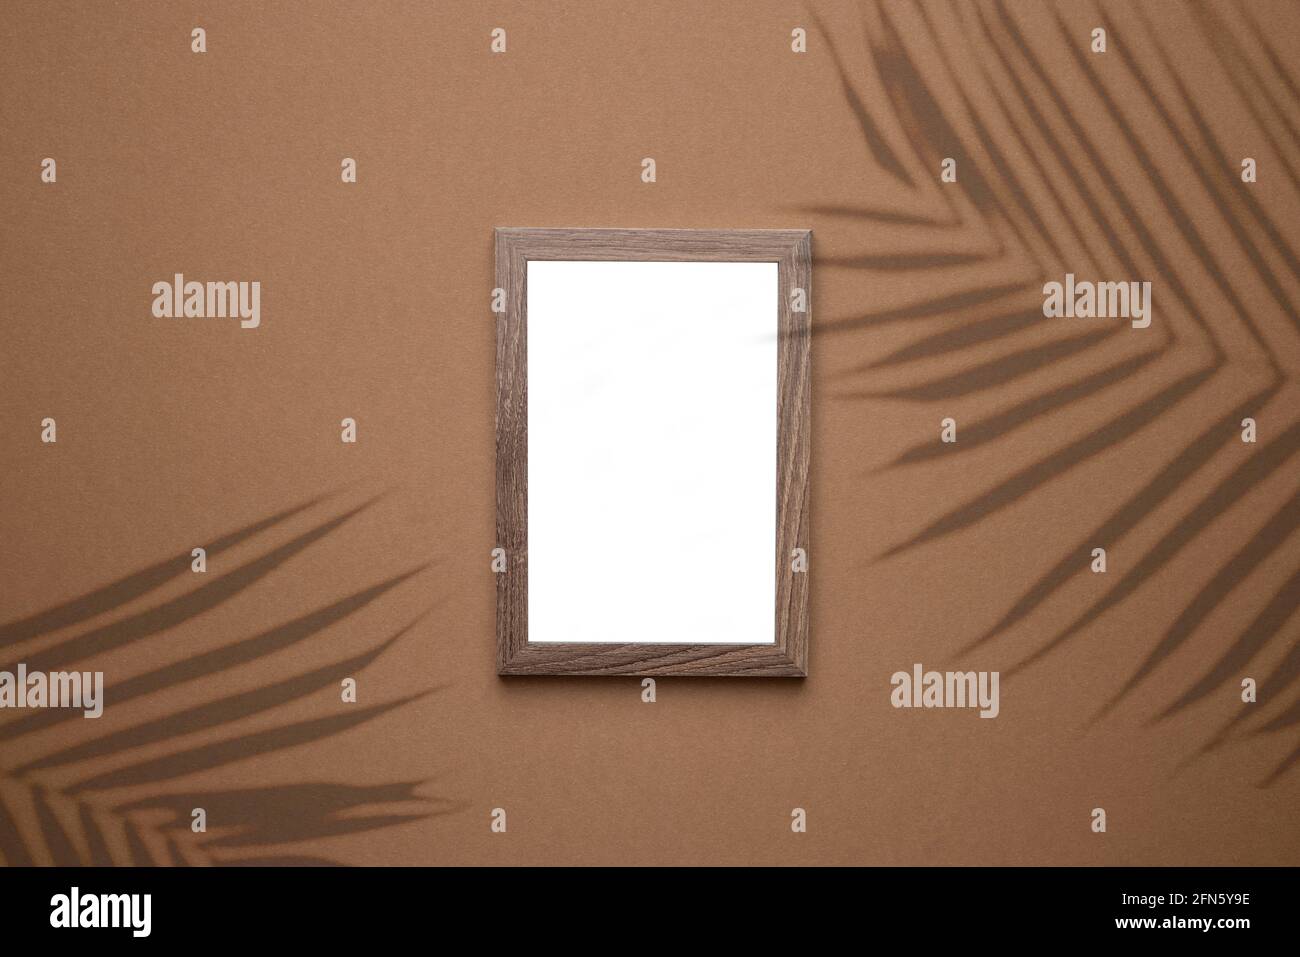 Blank picture frame on trend brown background with tropical plant shadow light as template for event promotion, design presentation, self portfolio etc. Stock Photo